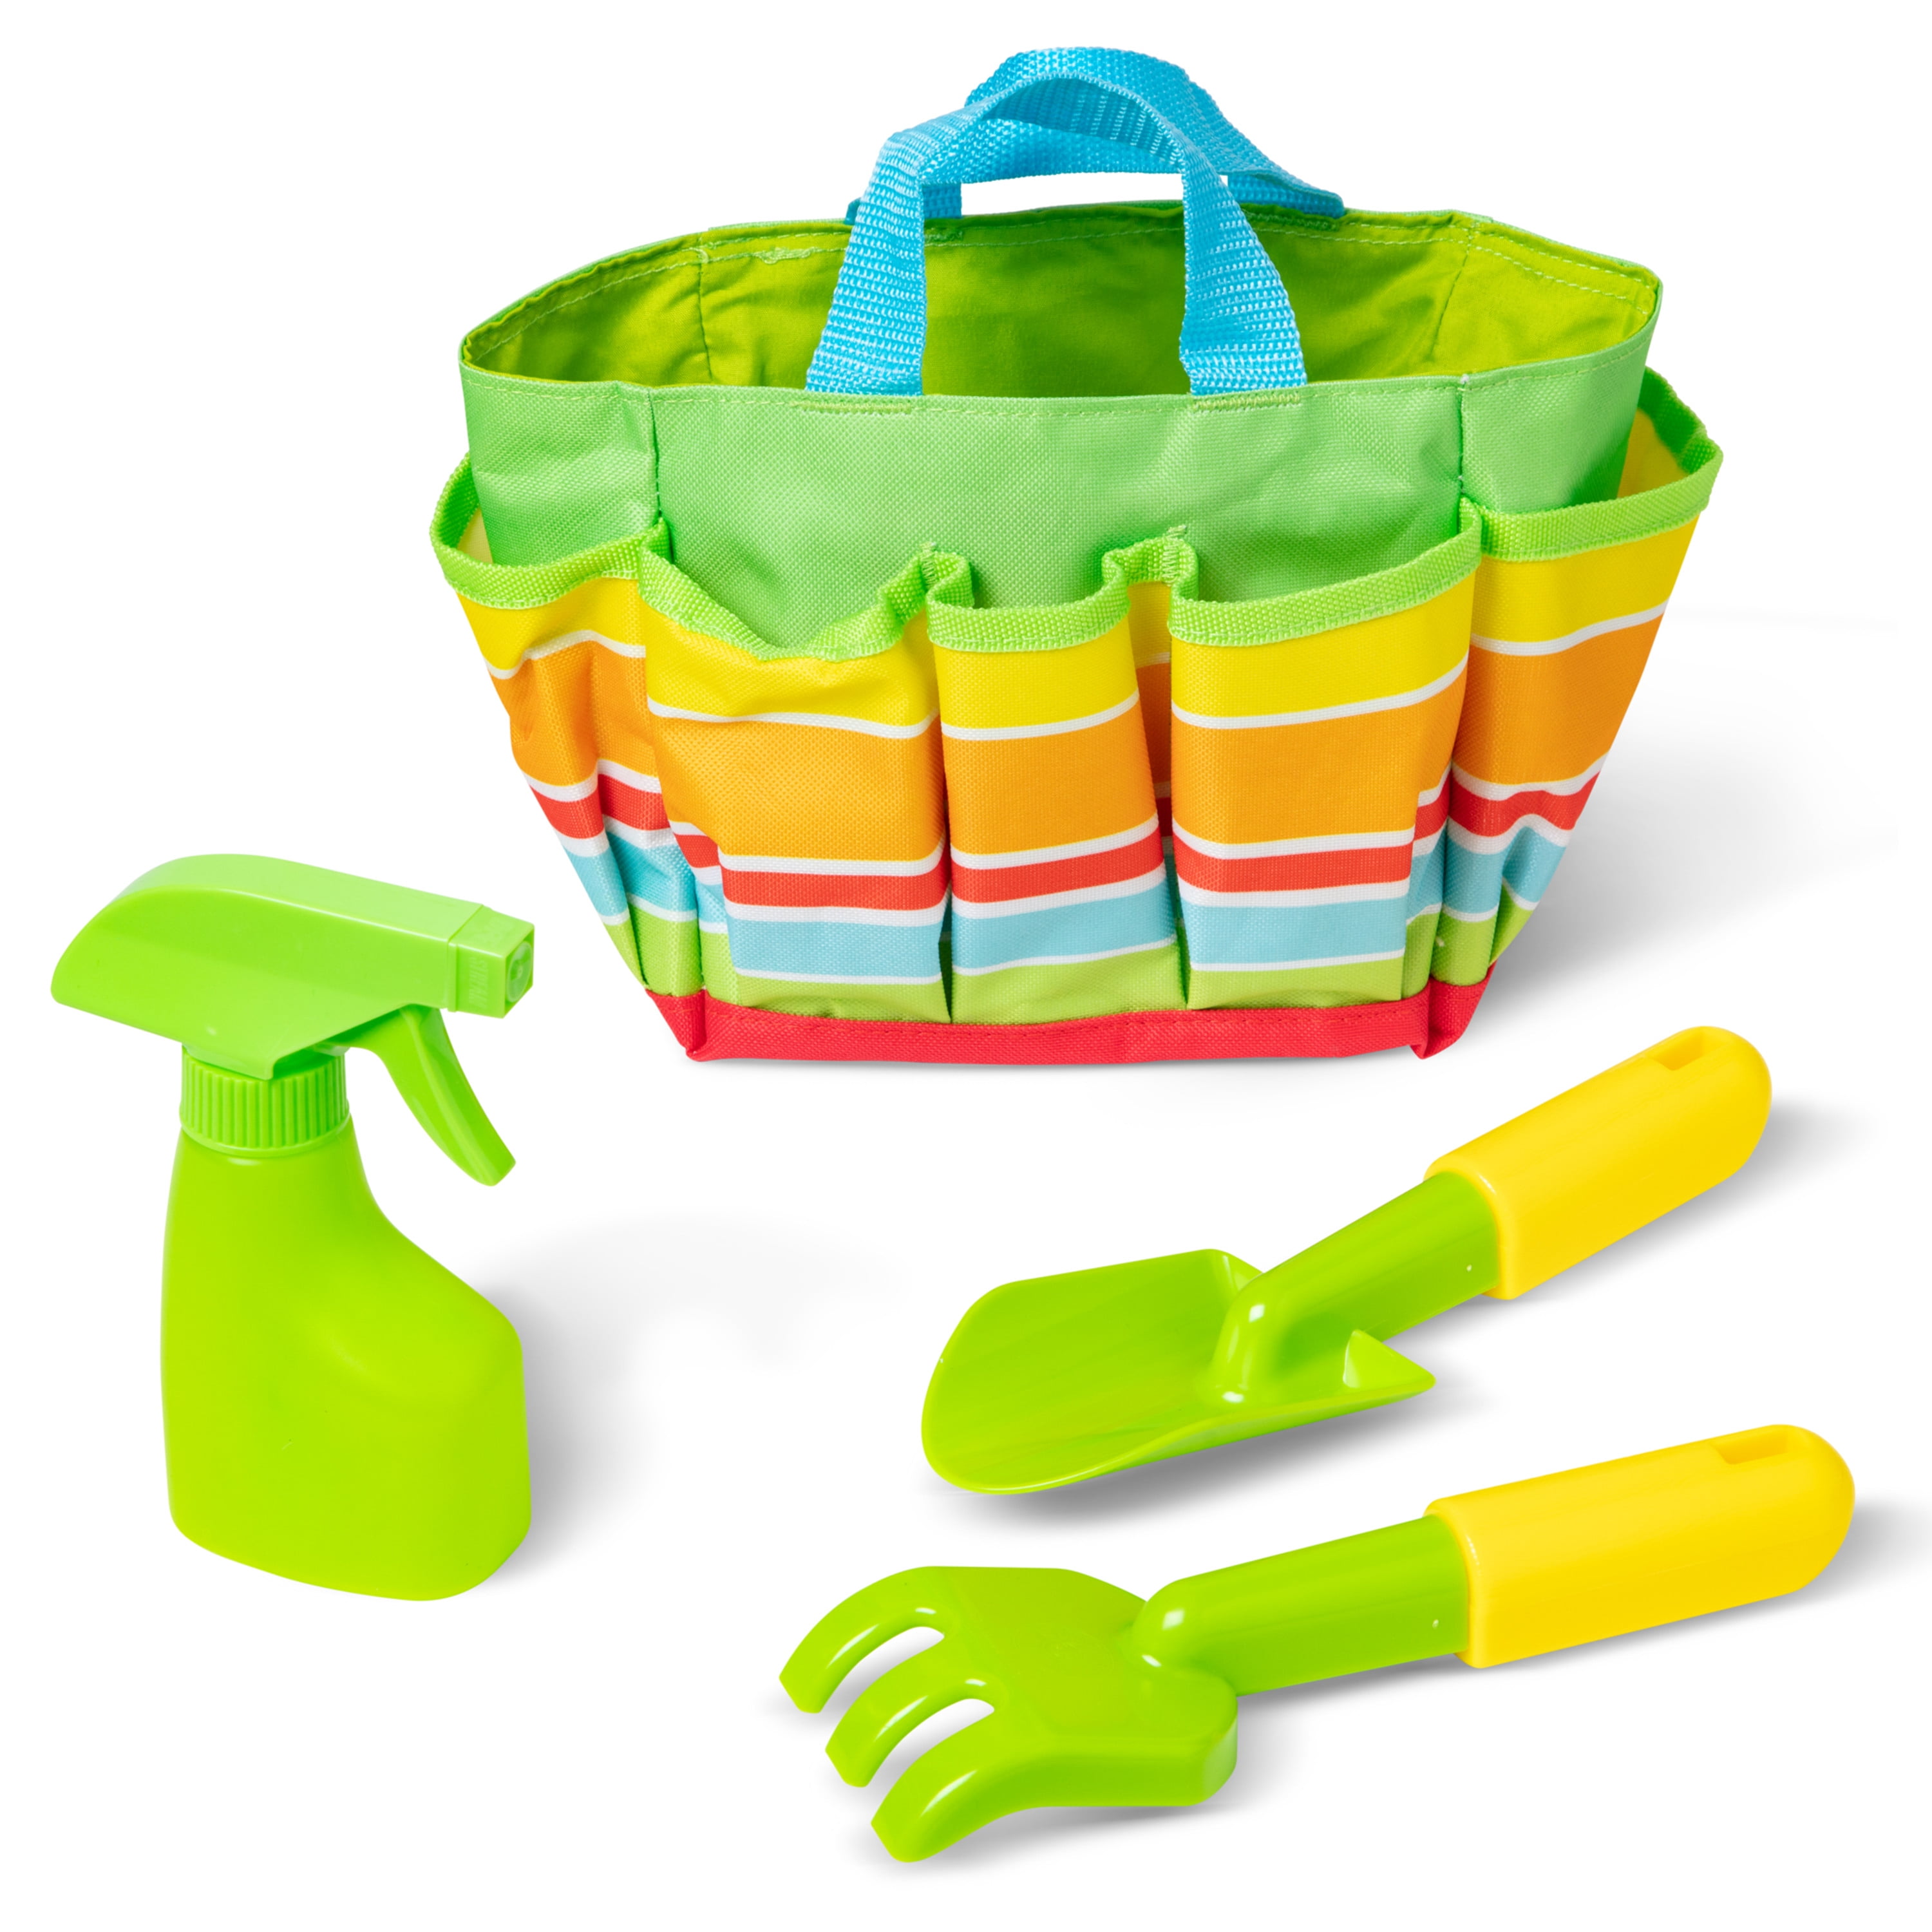 Melissa & Doug Sunny Patch Tootle Turtle Gardening Tote Set With Tools 